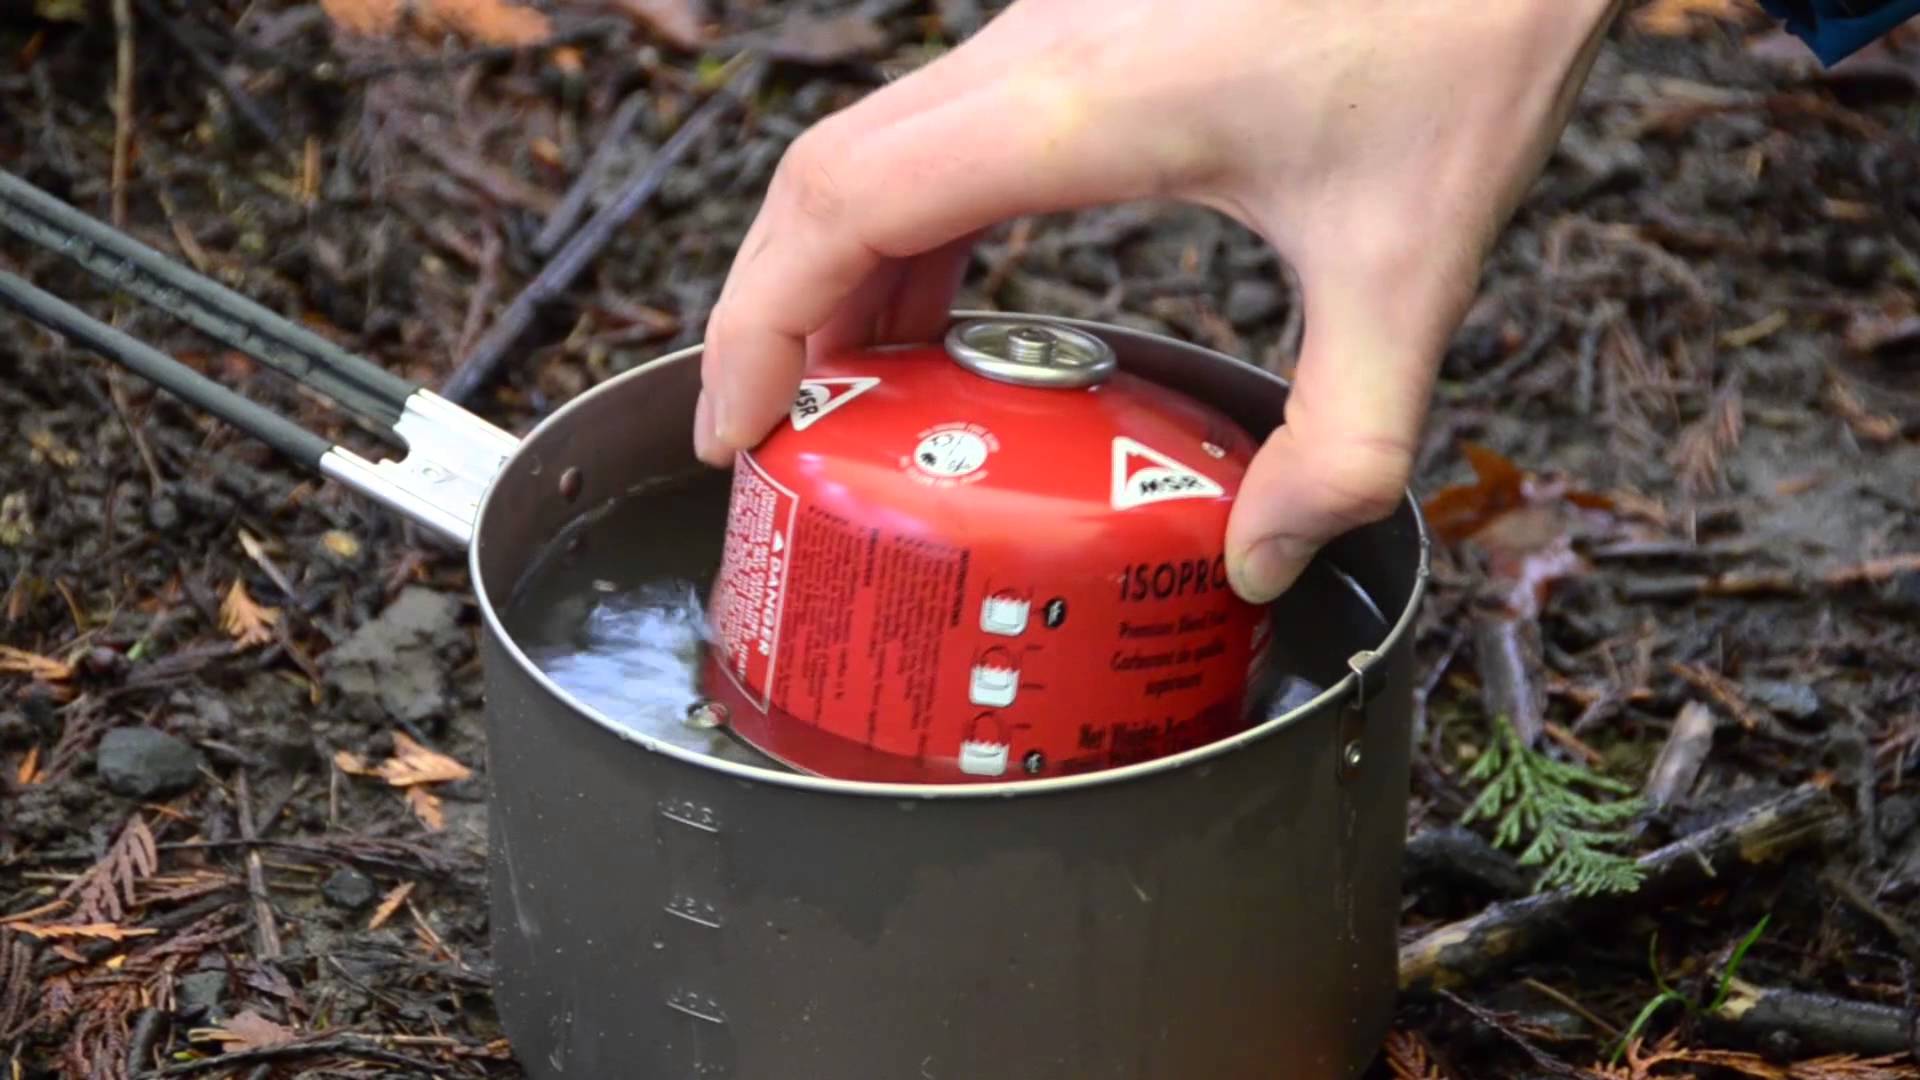 It's nearly impossible to get rid of a camp stove fuel canister in Maine